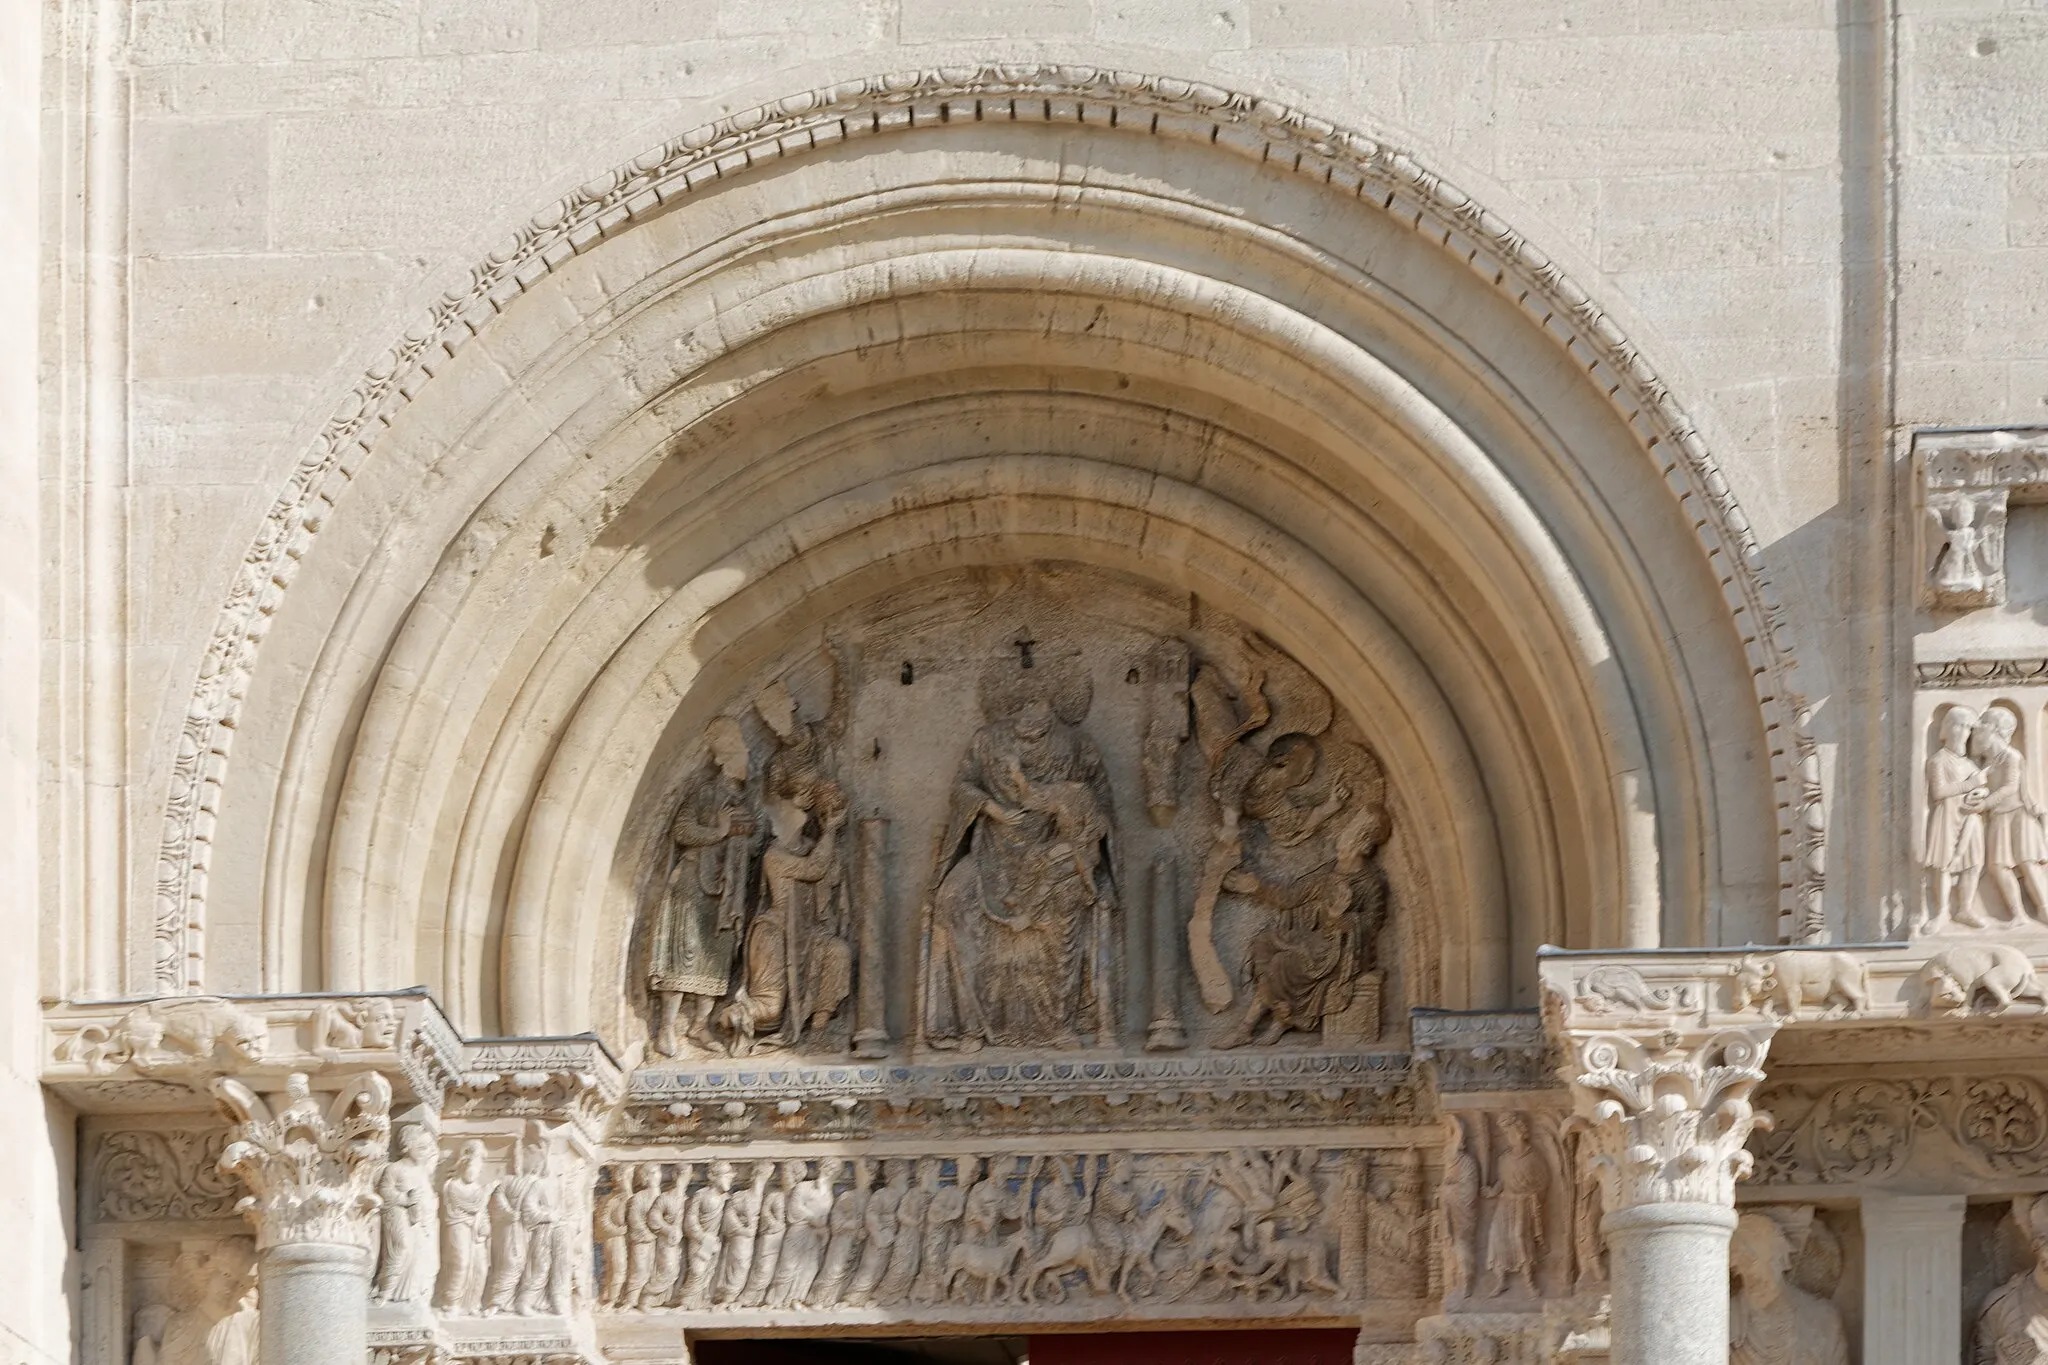 Photo showing: Tympanum: Madonna and Child, in majesty, Adoration of the Magi, Joseph's dream. Frieze of the lintel: Procession of the Apostles, Jesus enters Jerusalem mounted on a donkey, Reception by the people and recognition of Jesus as the Messiah.